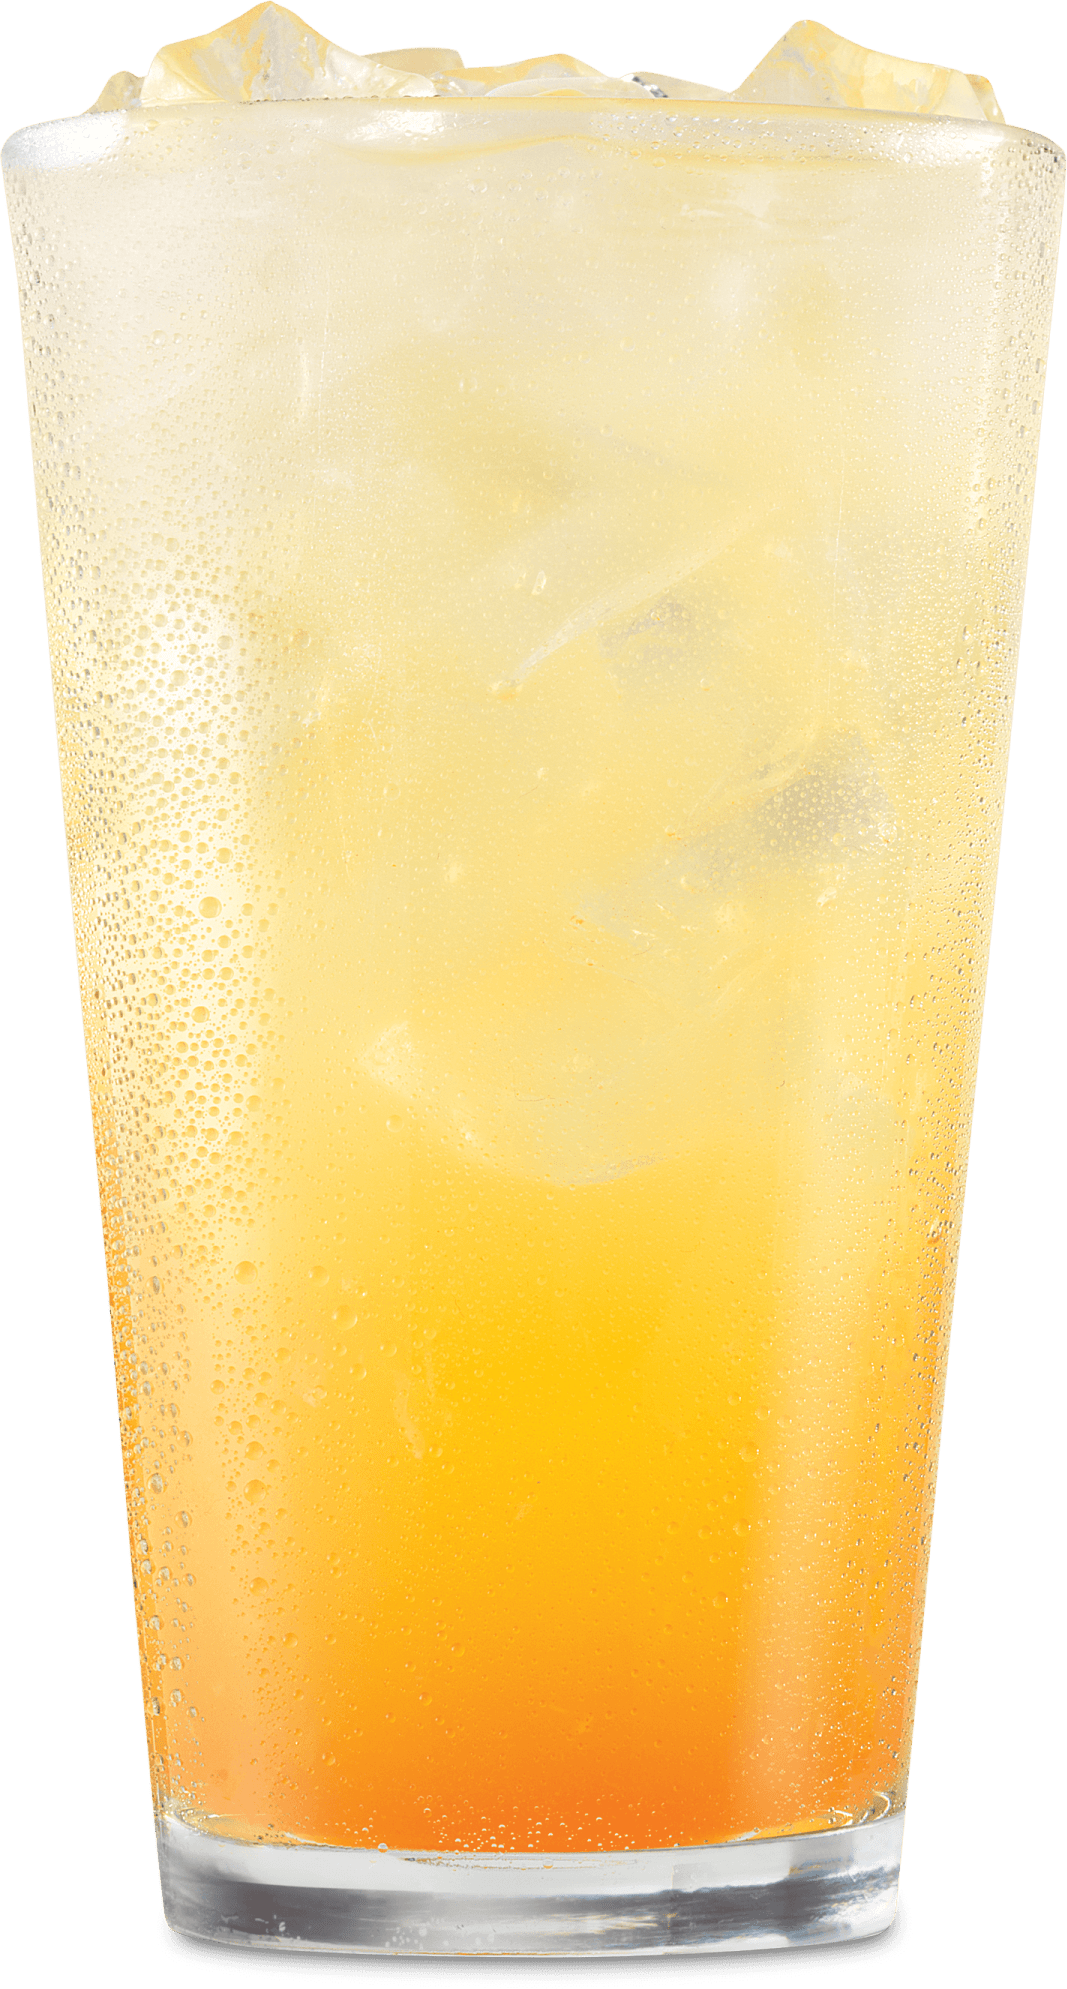 Arby's Large Peach Lemonade Nutrition Facts